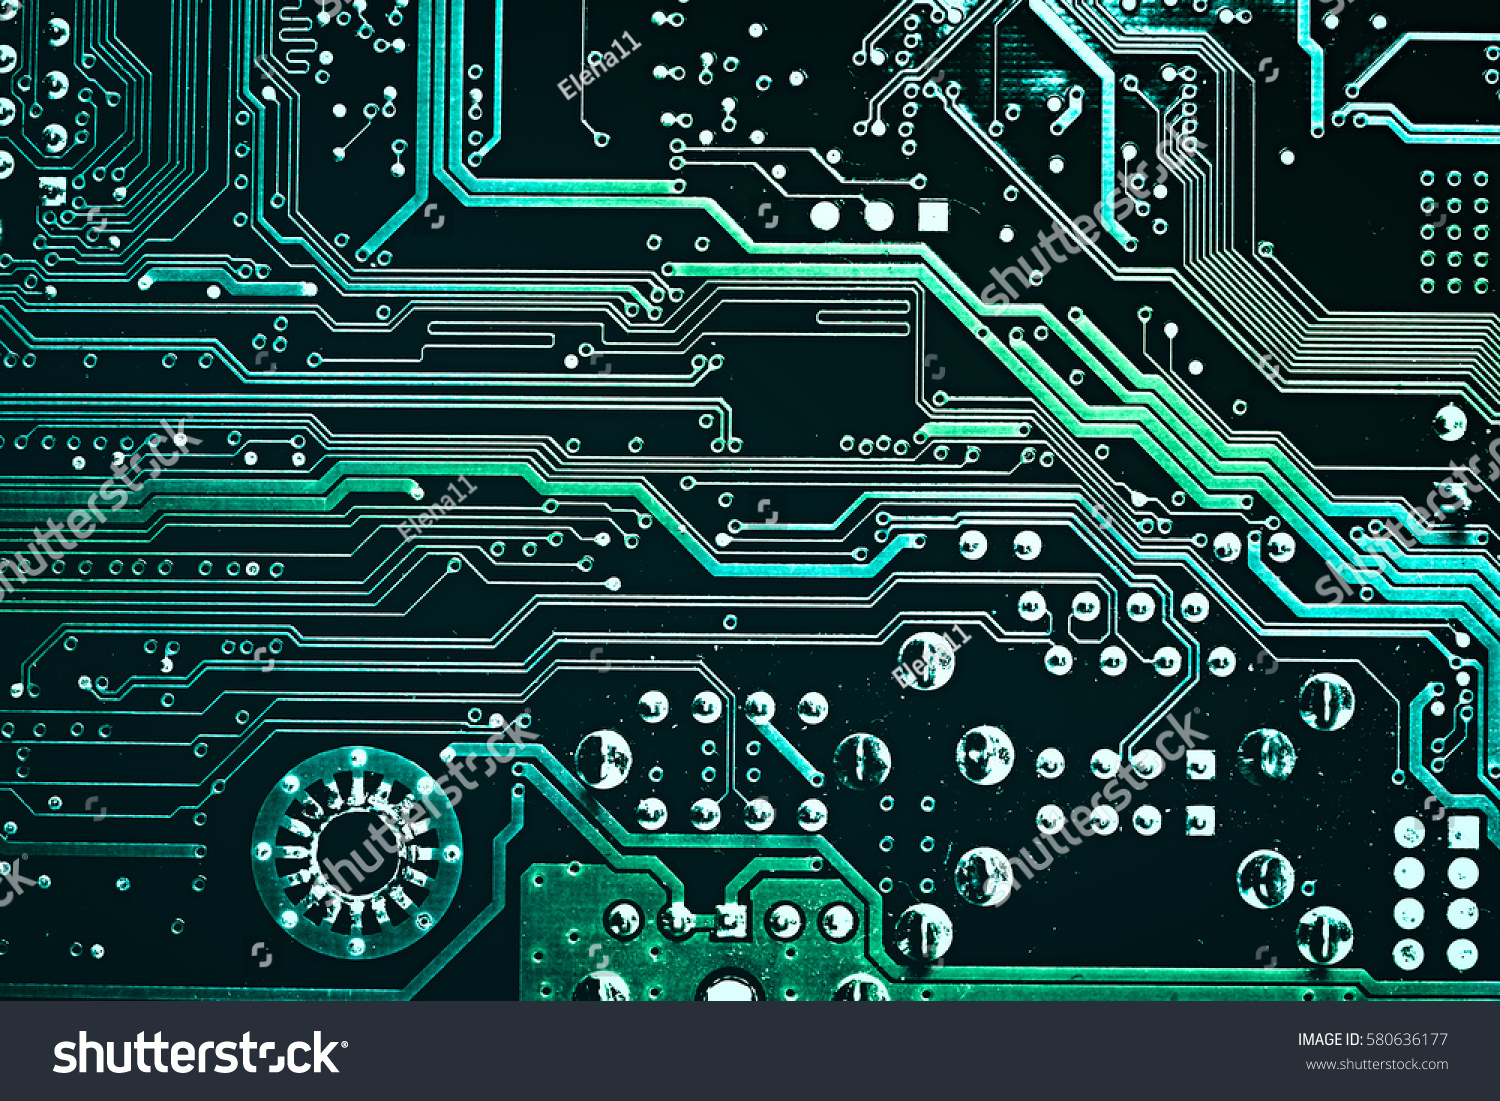 Circuit board. Electronic computer hardware technology. Motherboard digital chip. Tech science background. Integrated communication processor. Information engineering component. #580636177